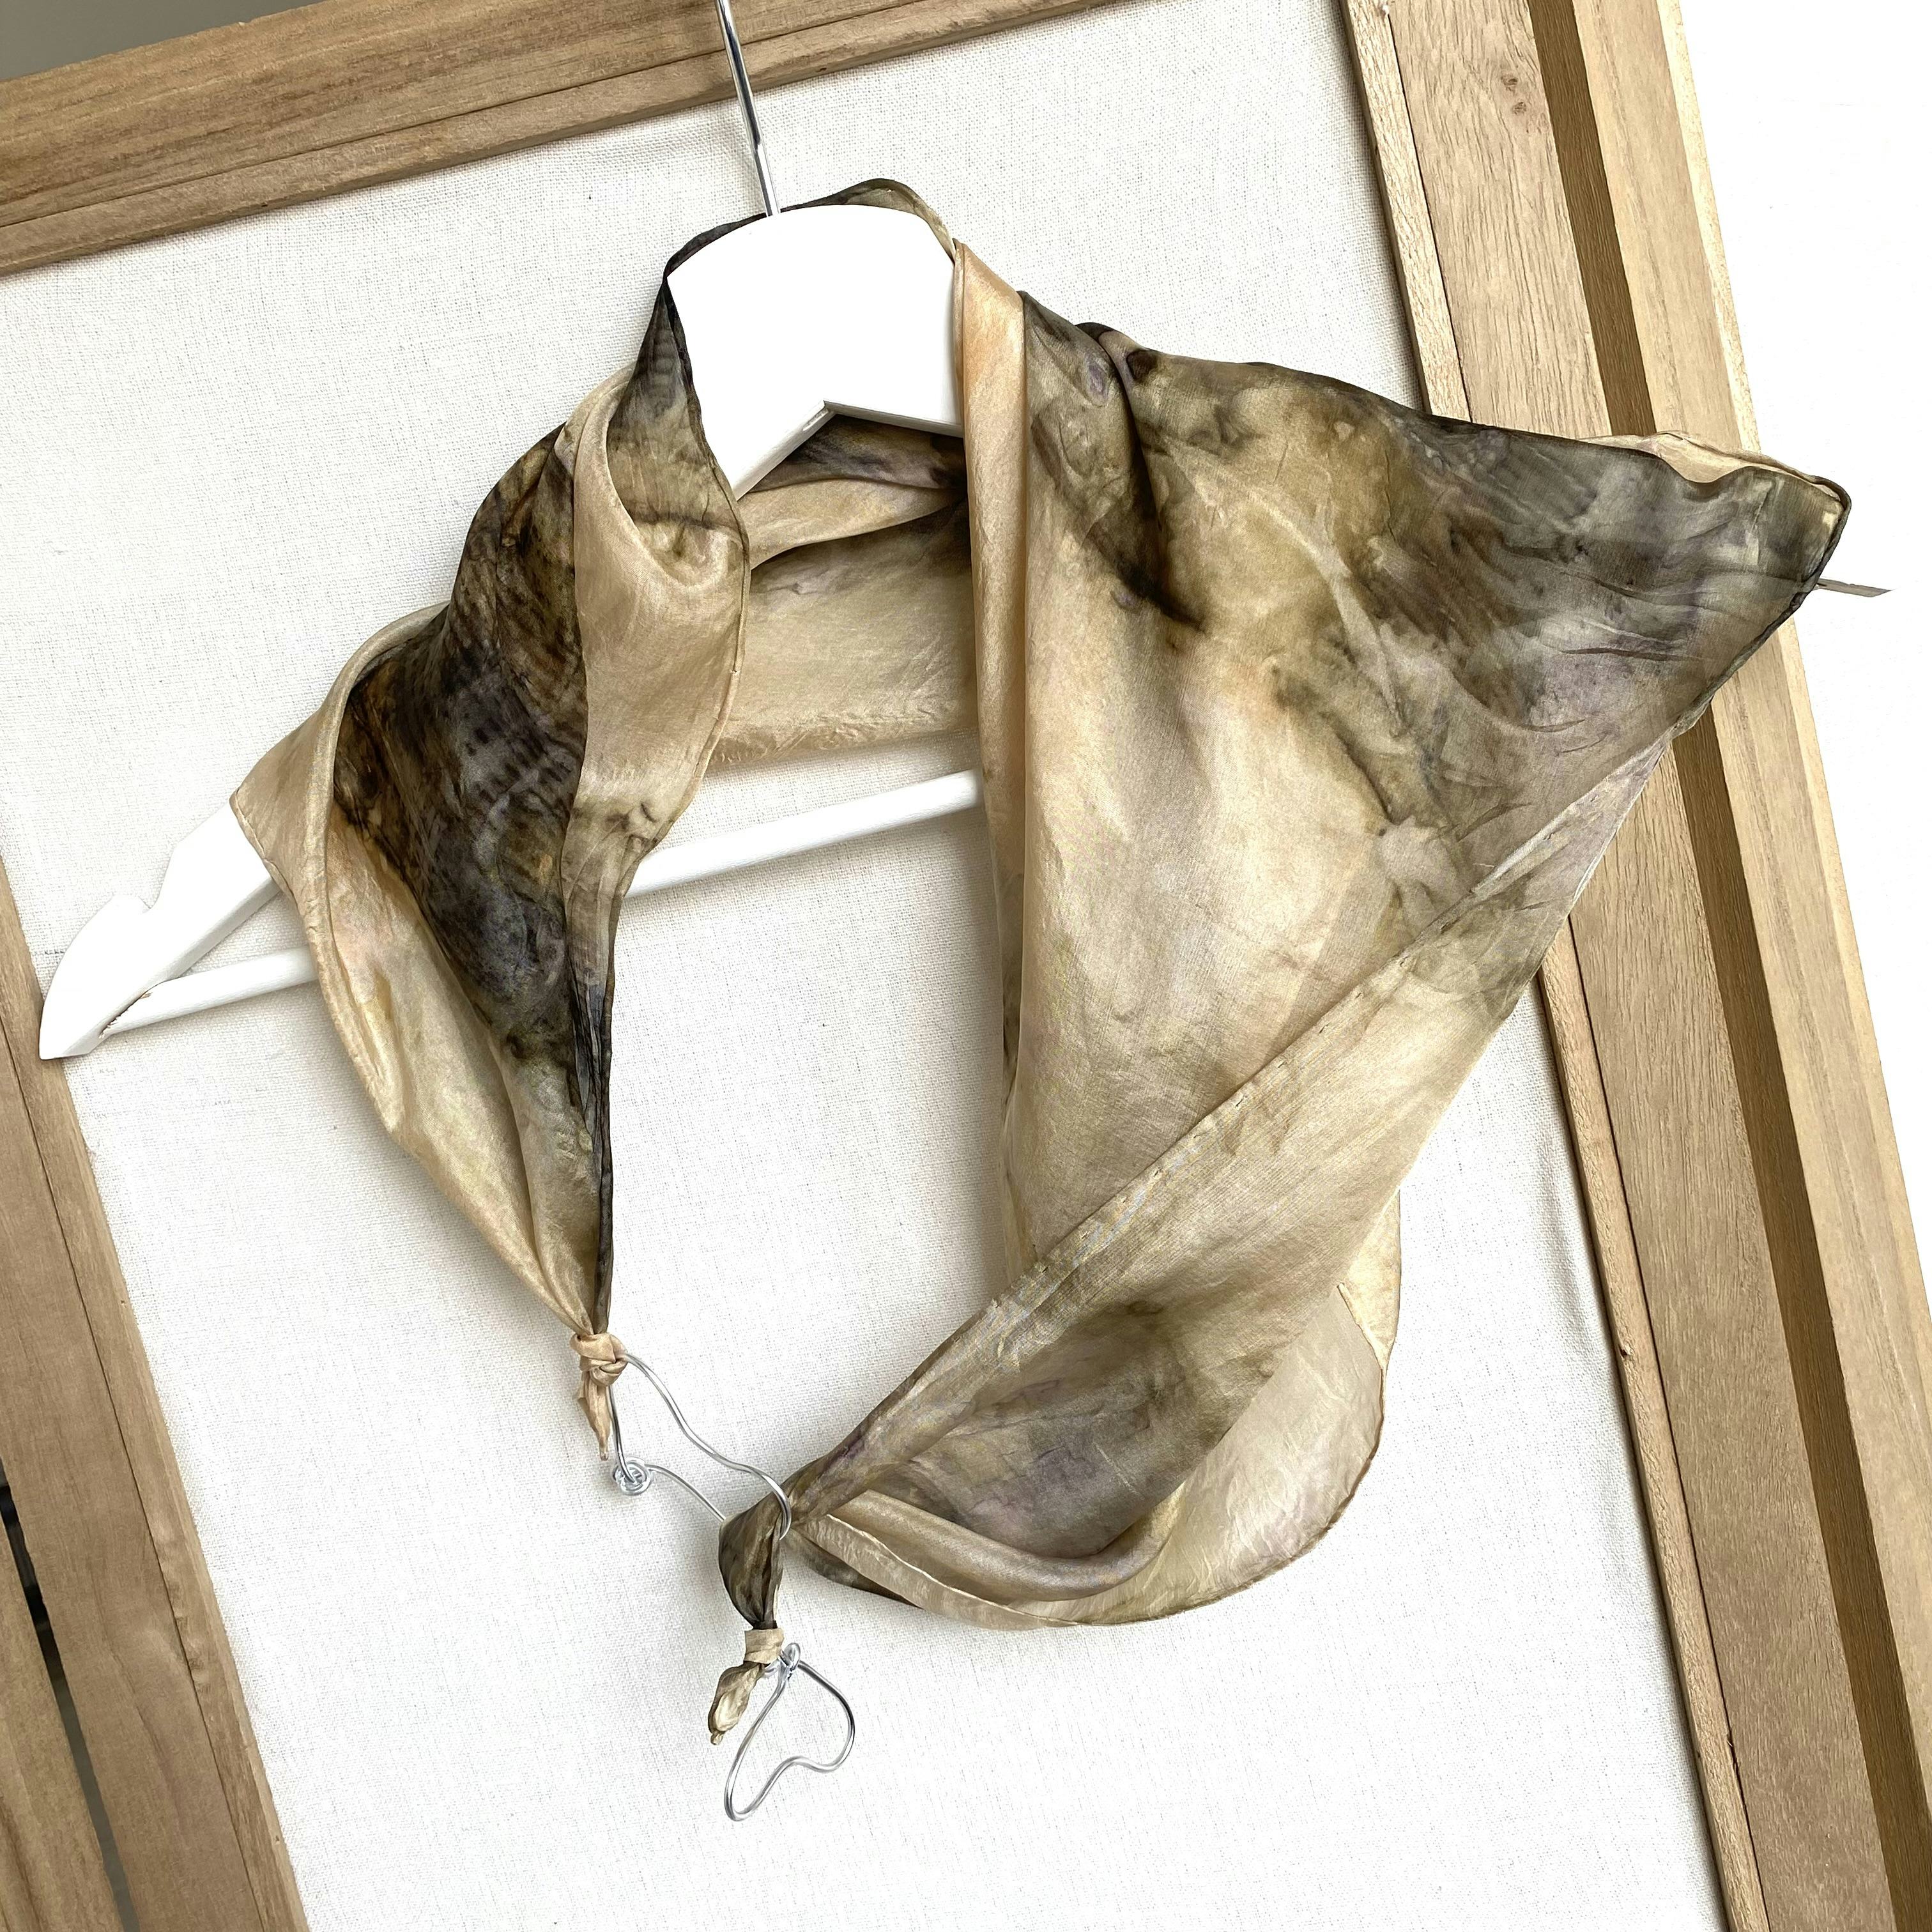 Jewelry silk scarf dyed with maple leaves, Selenite di Marusca Aldeghi, Mendrisio, image 1 | Mimelis